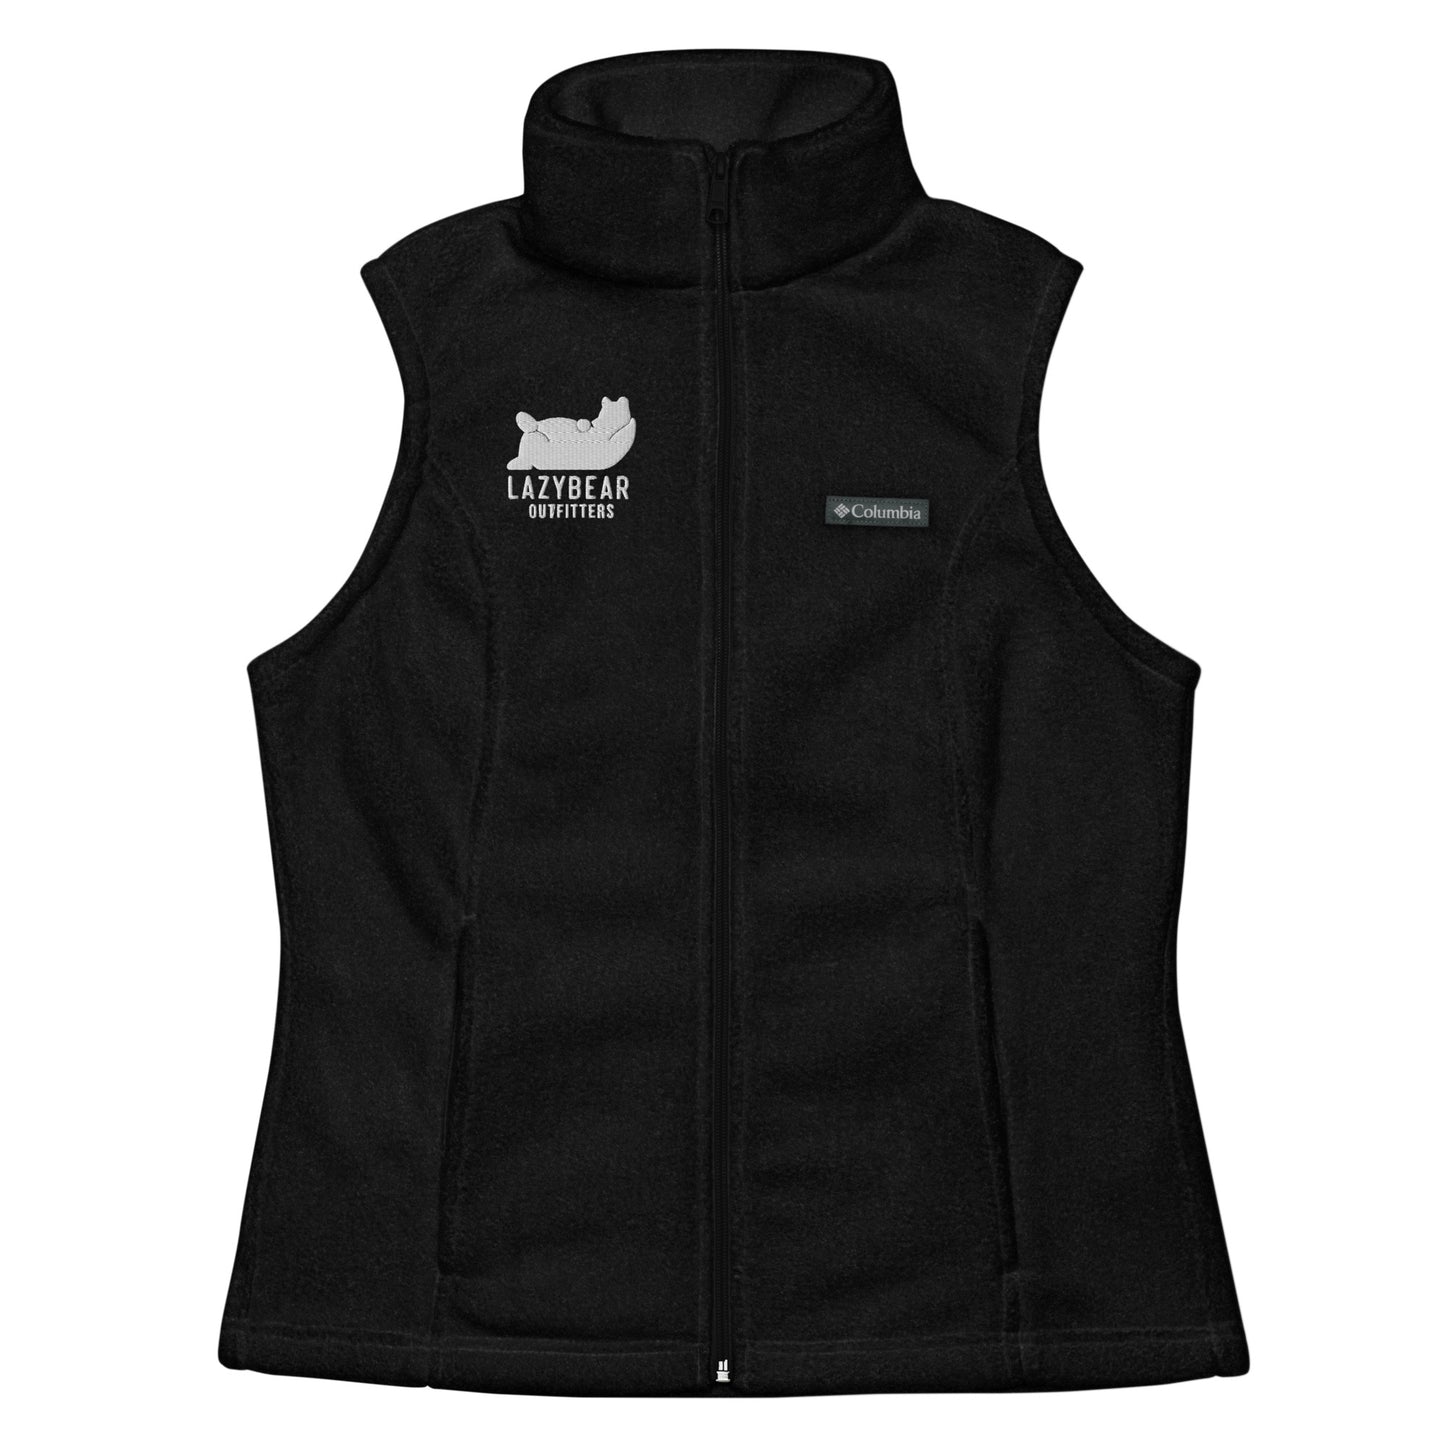 Women’s Lazy Bear Outfitters x Columbia Fleece Vest (dark options with white logo)